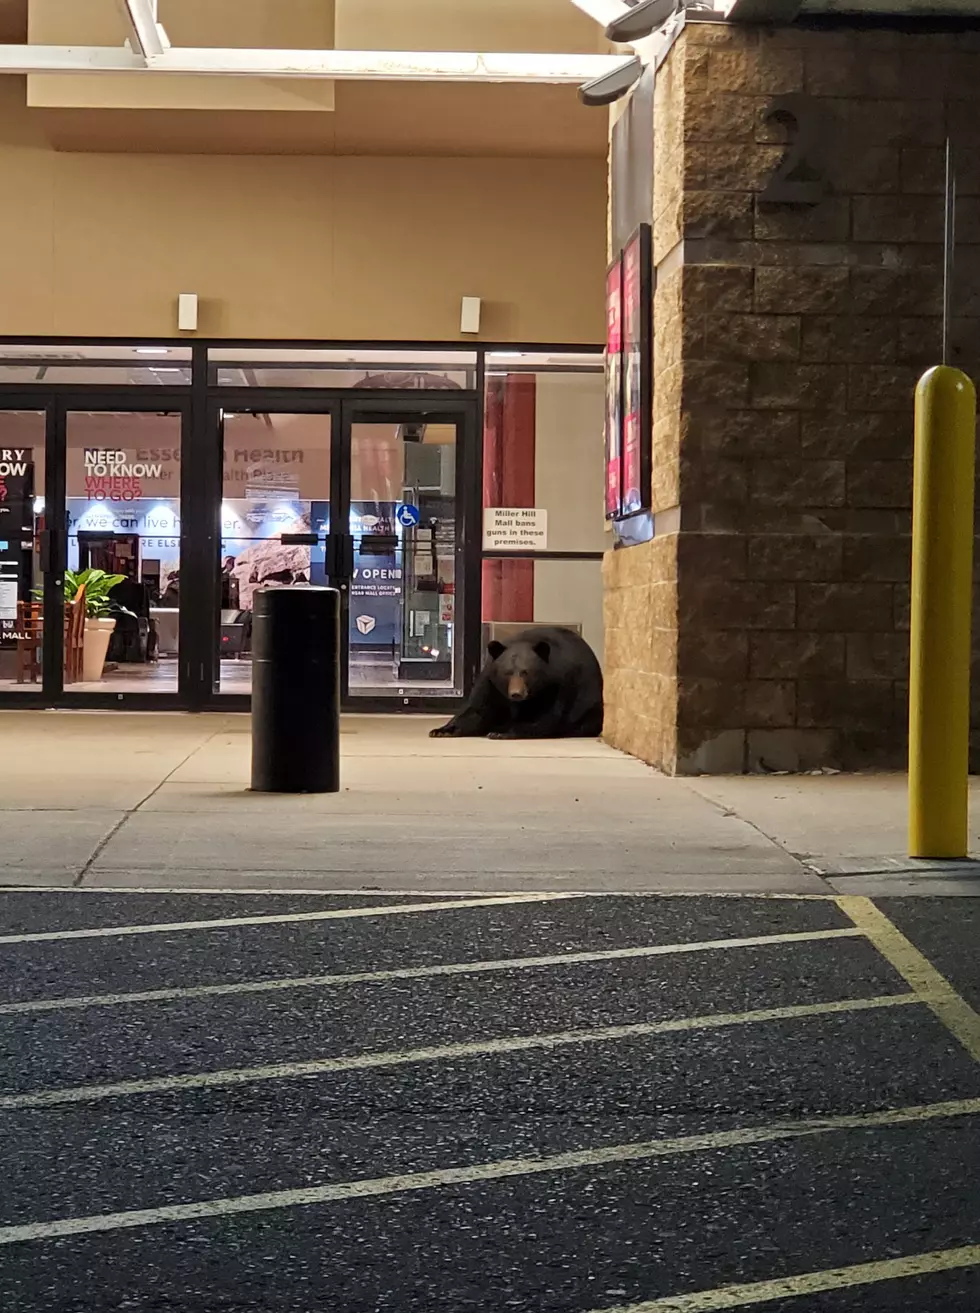 Apparently Bears Miss Shopping Too